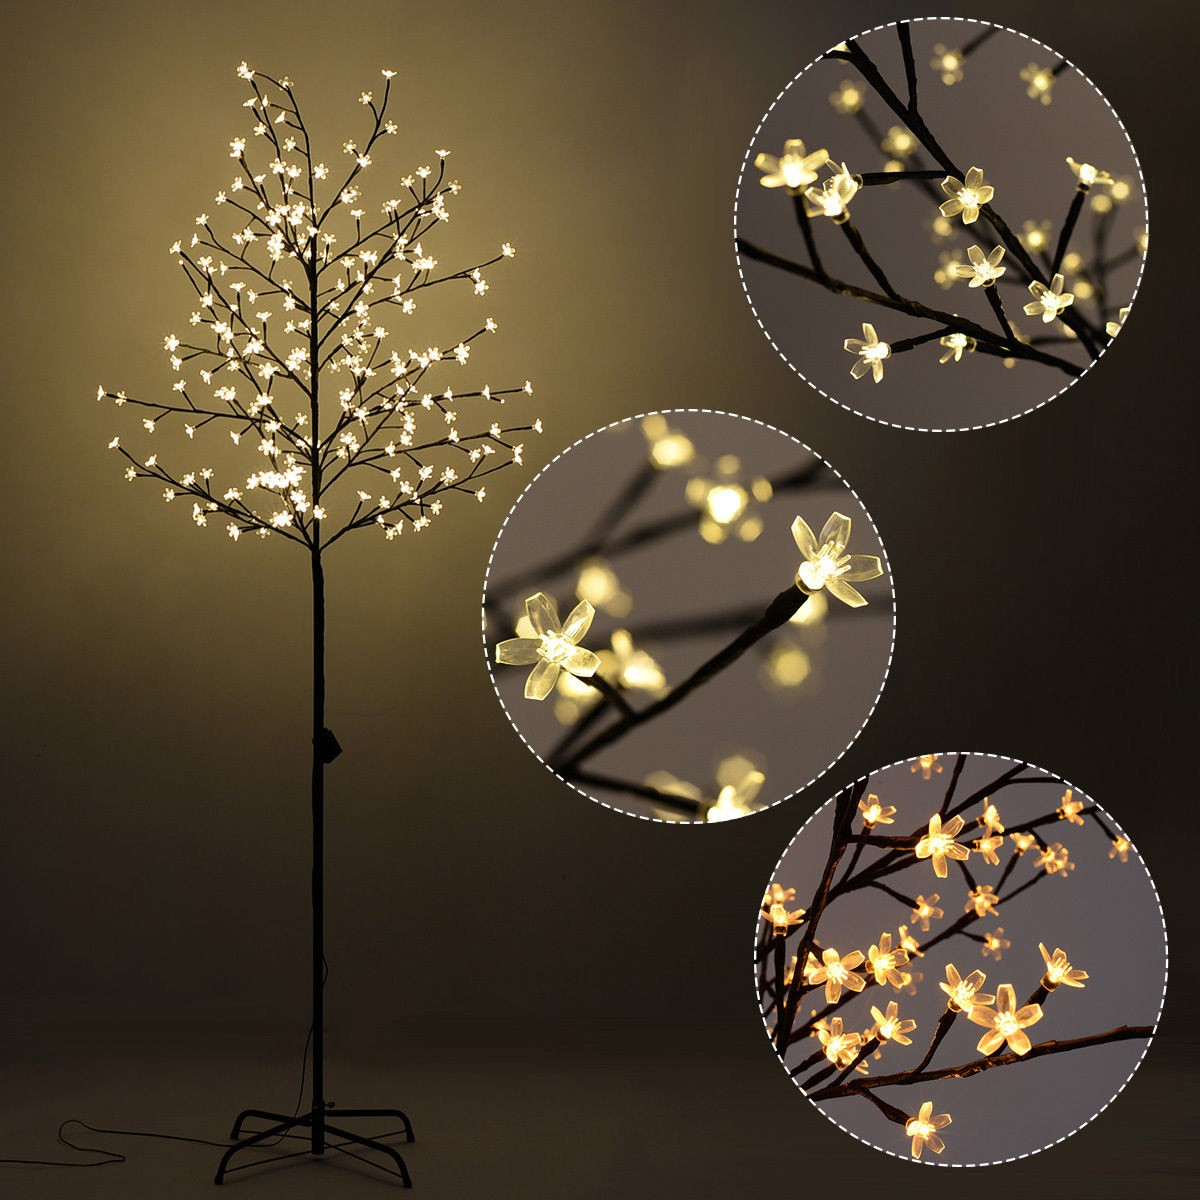 Details About Easter Christmas Xmas Cherry Blossom 120 220led Tree Light Floor Lamp Decor Warm intended for size 1200 X 1200